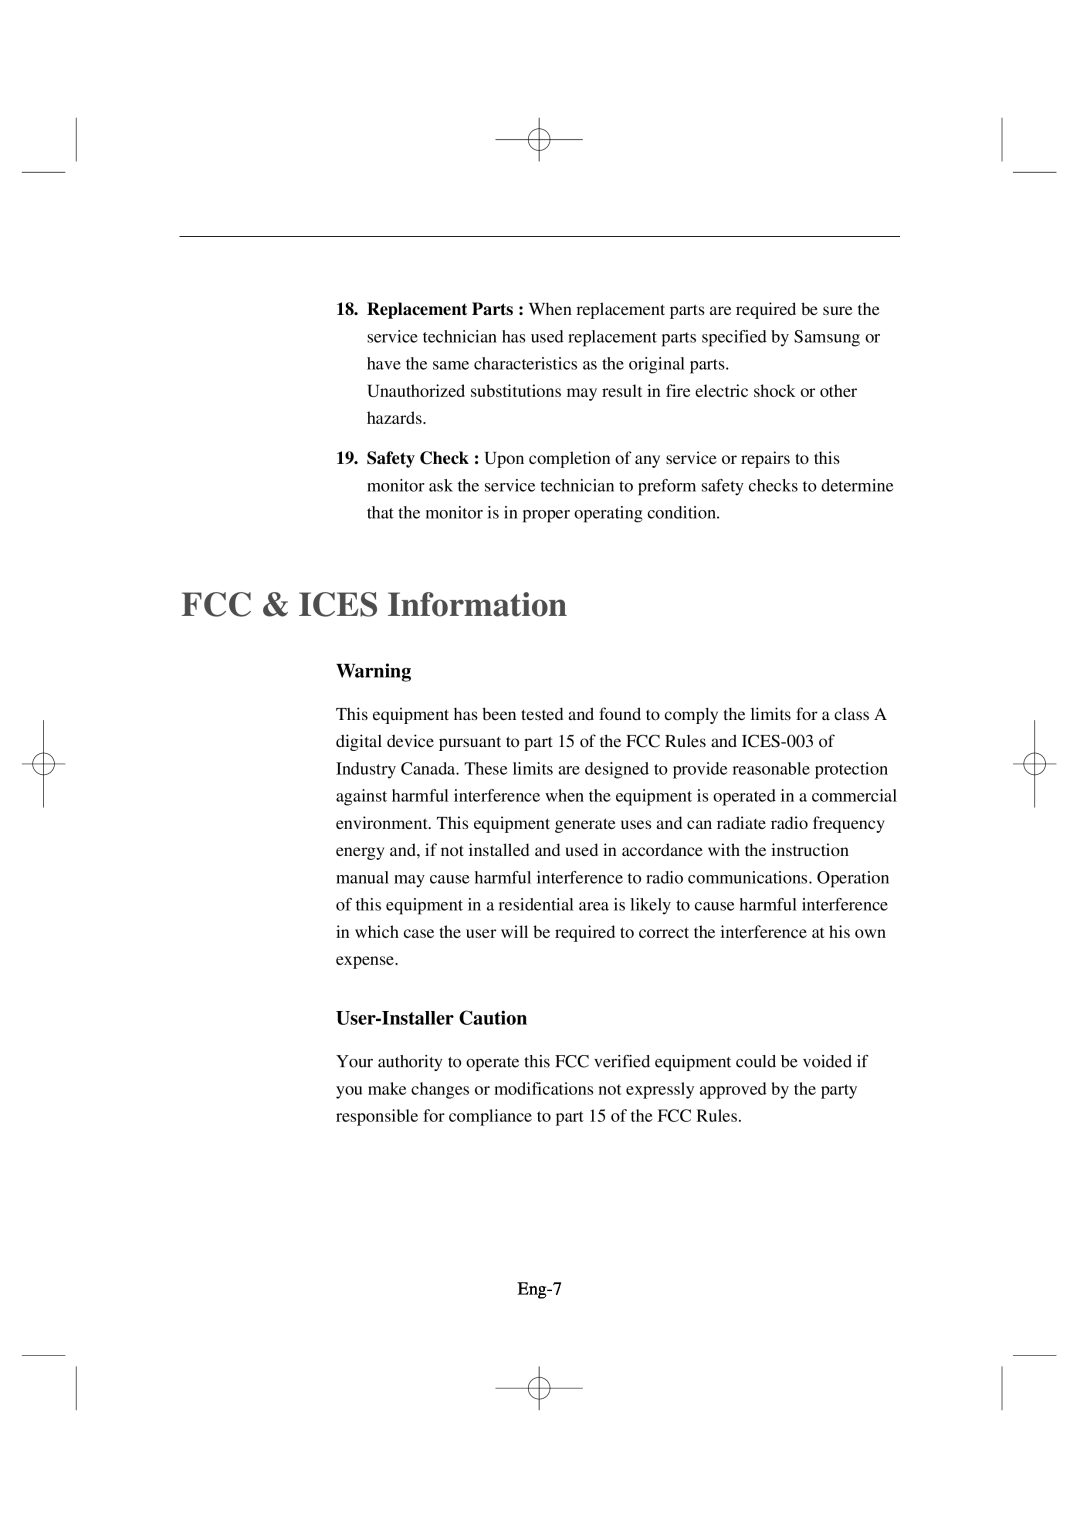 Samsung SSC17WEB manual FCC & ICES Information, User-InstallerCaution 